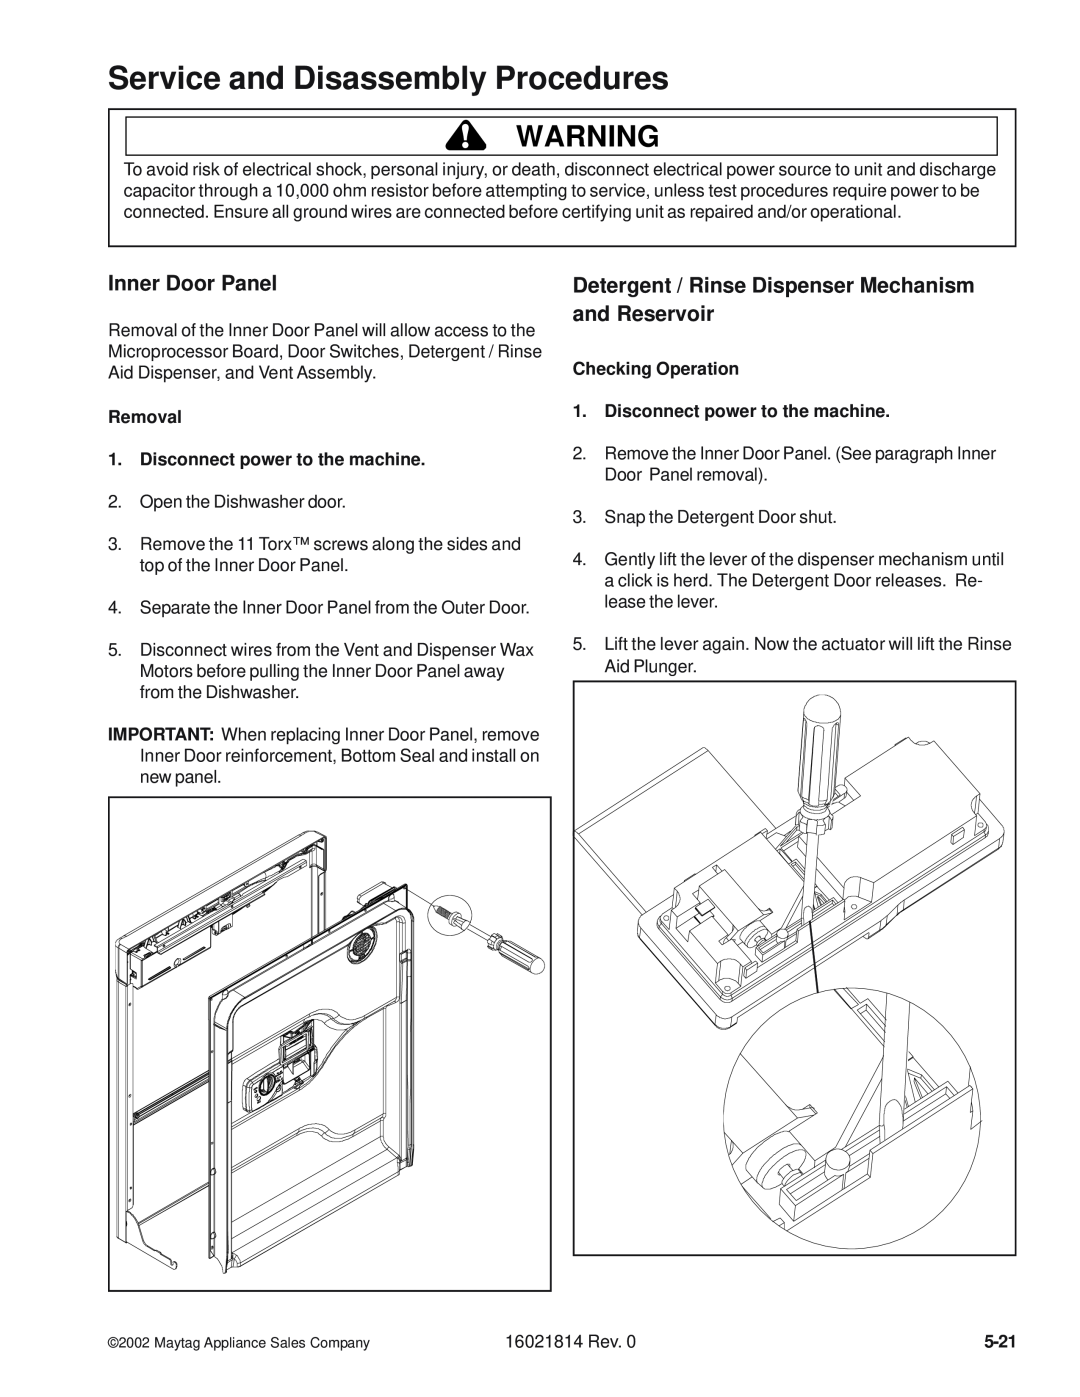 Maytag MDB5600AW Service and Disassembly Procedures, Inner Door Panel, Removal 1.Disconnect power to the machine, 5-21 